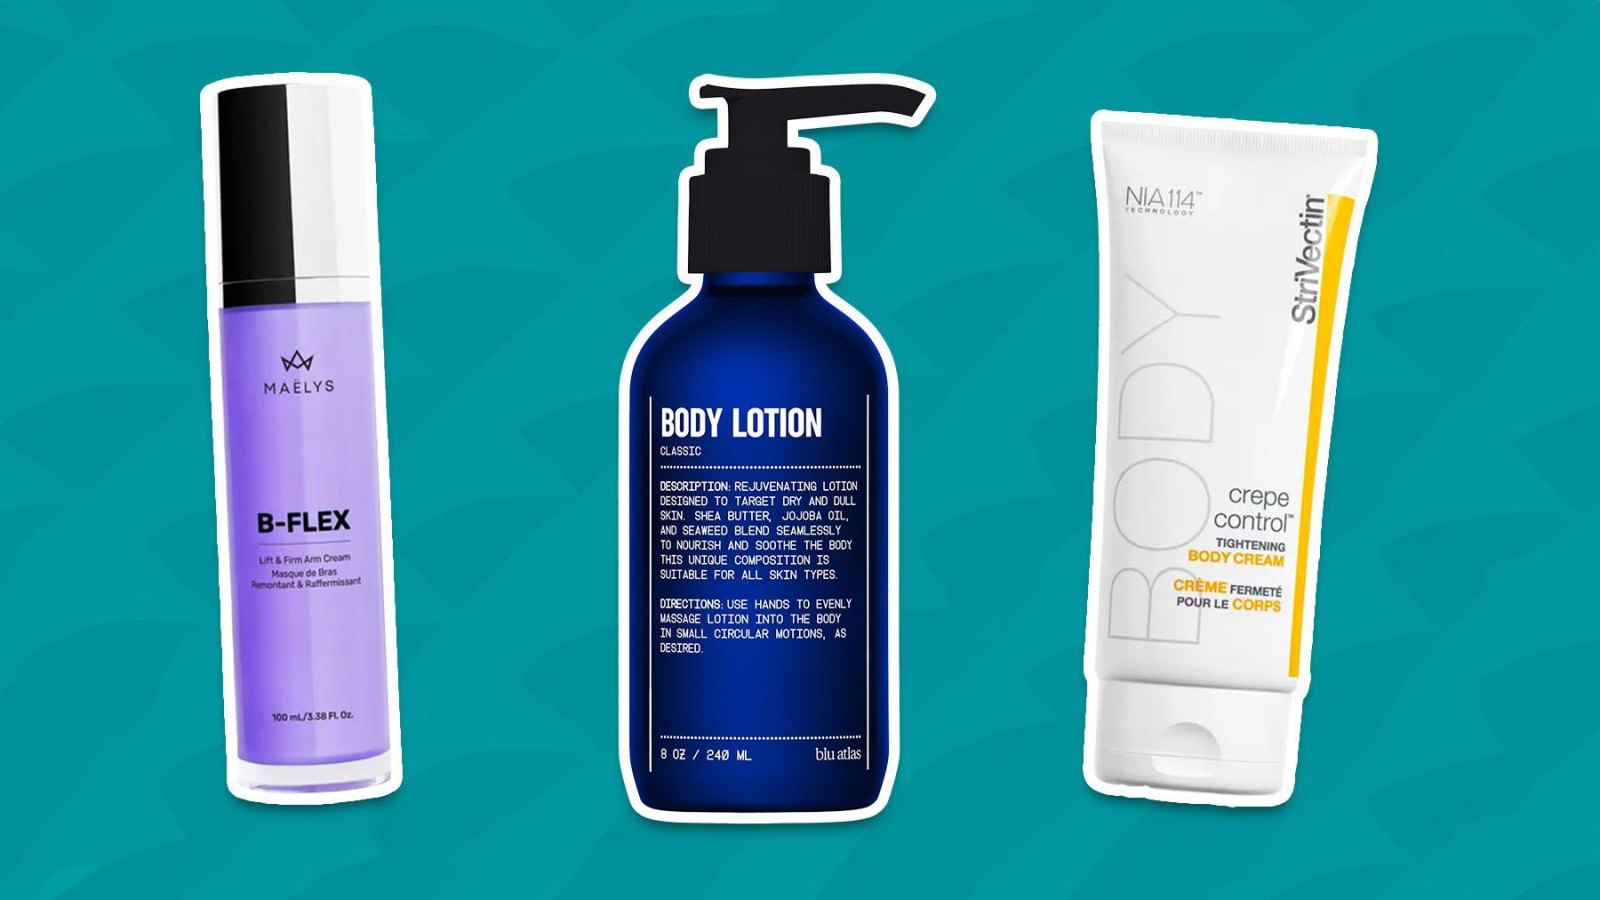 BODY FASHION Repairing And Anti-Aging Body Lotion